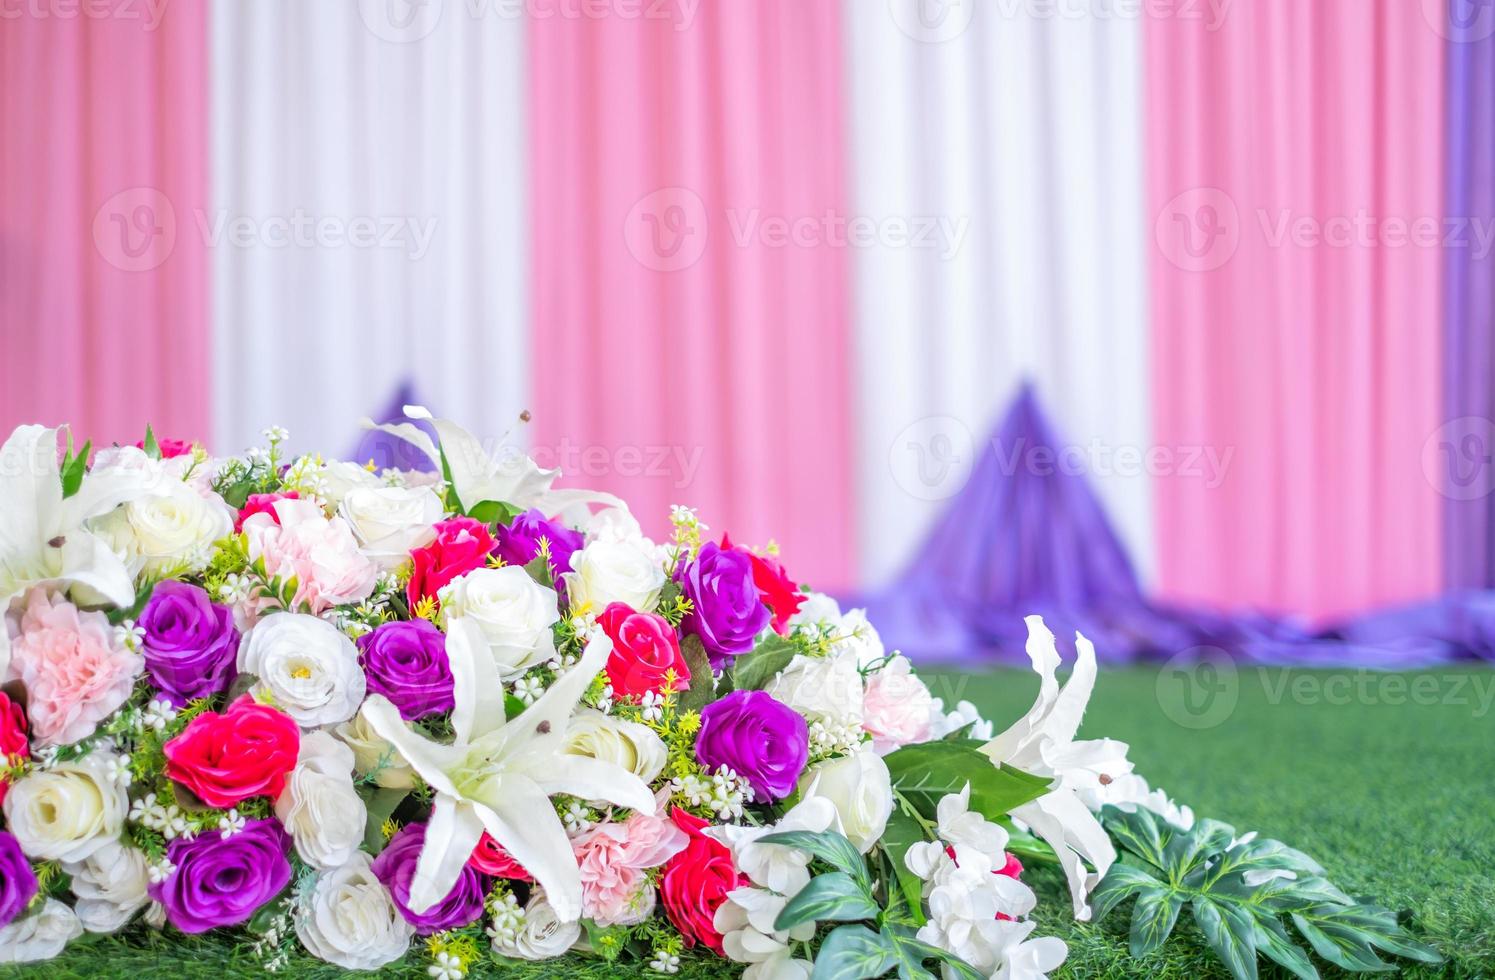 Colorful artificial bouquets placed on green artificial grass, stage cloth backdrop. photo